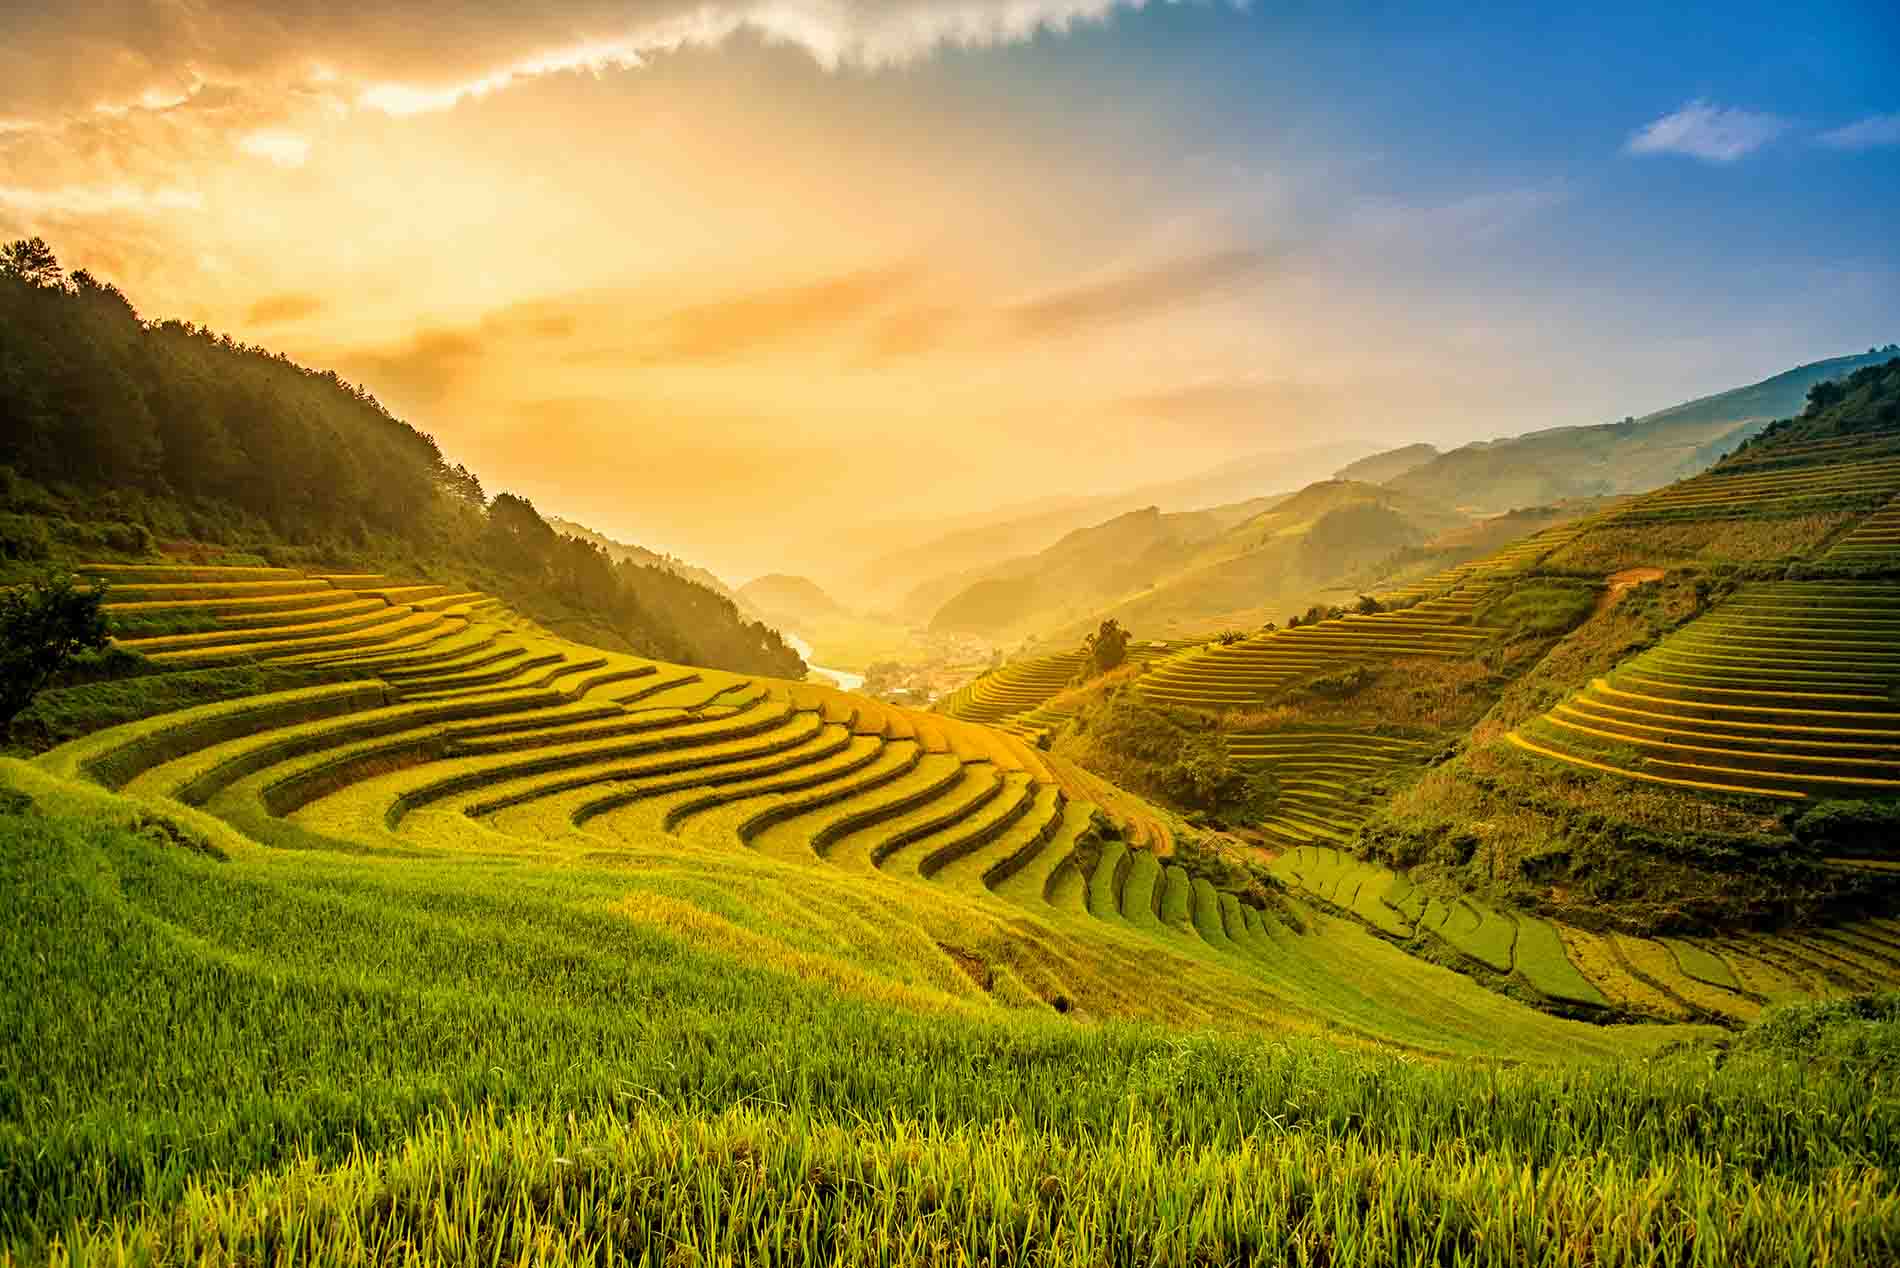 A sunset on the rice terraces of Northern Vietnam, with a river in the background.